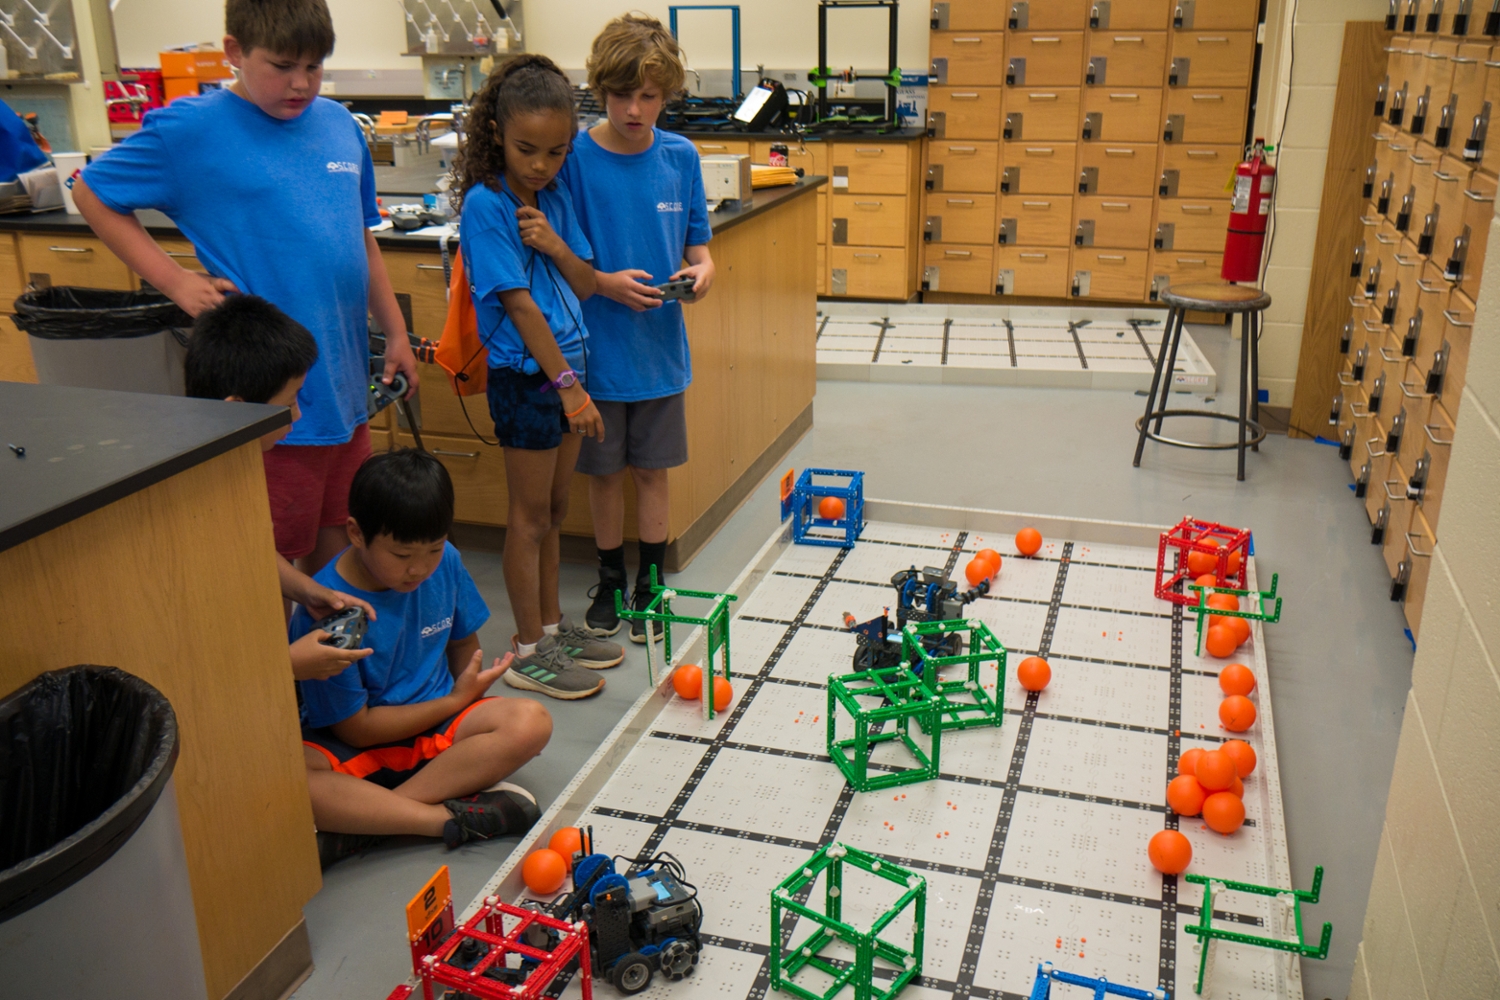 S.C.O.R.E. Hosts VEX IQ Day Camp to Ready Competitors